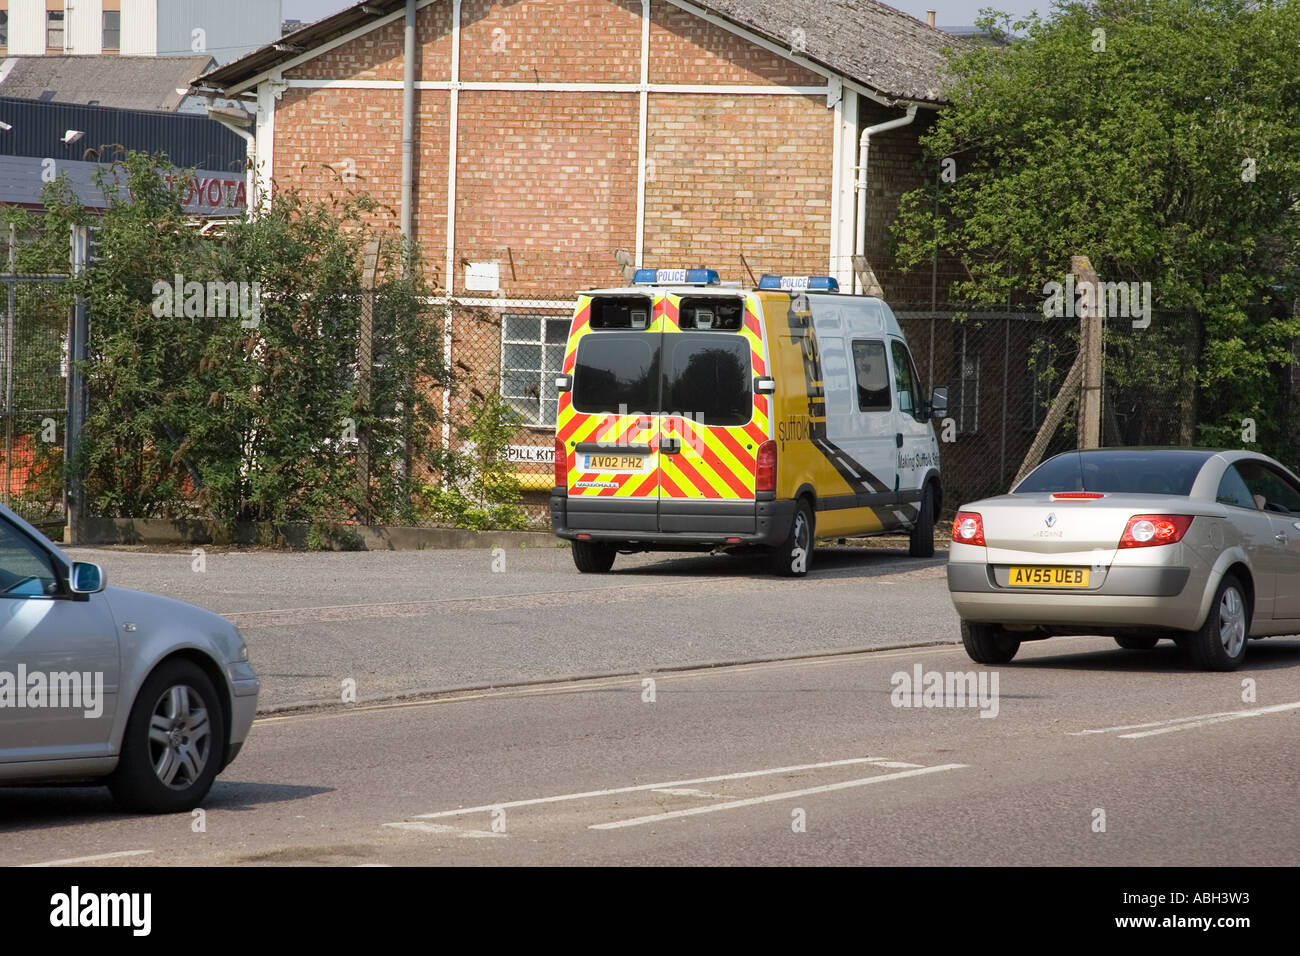 A police operated camera van in UK Stock Photo